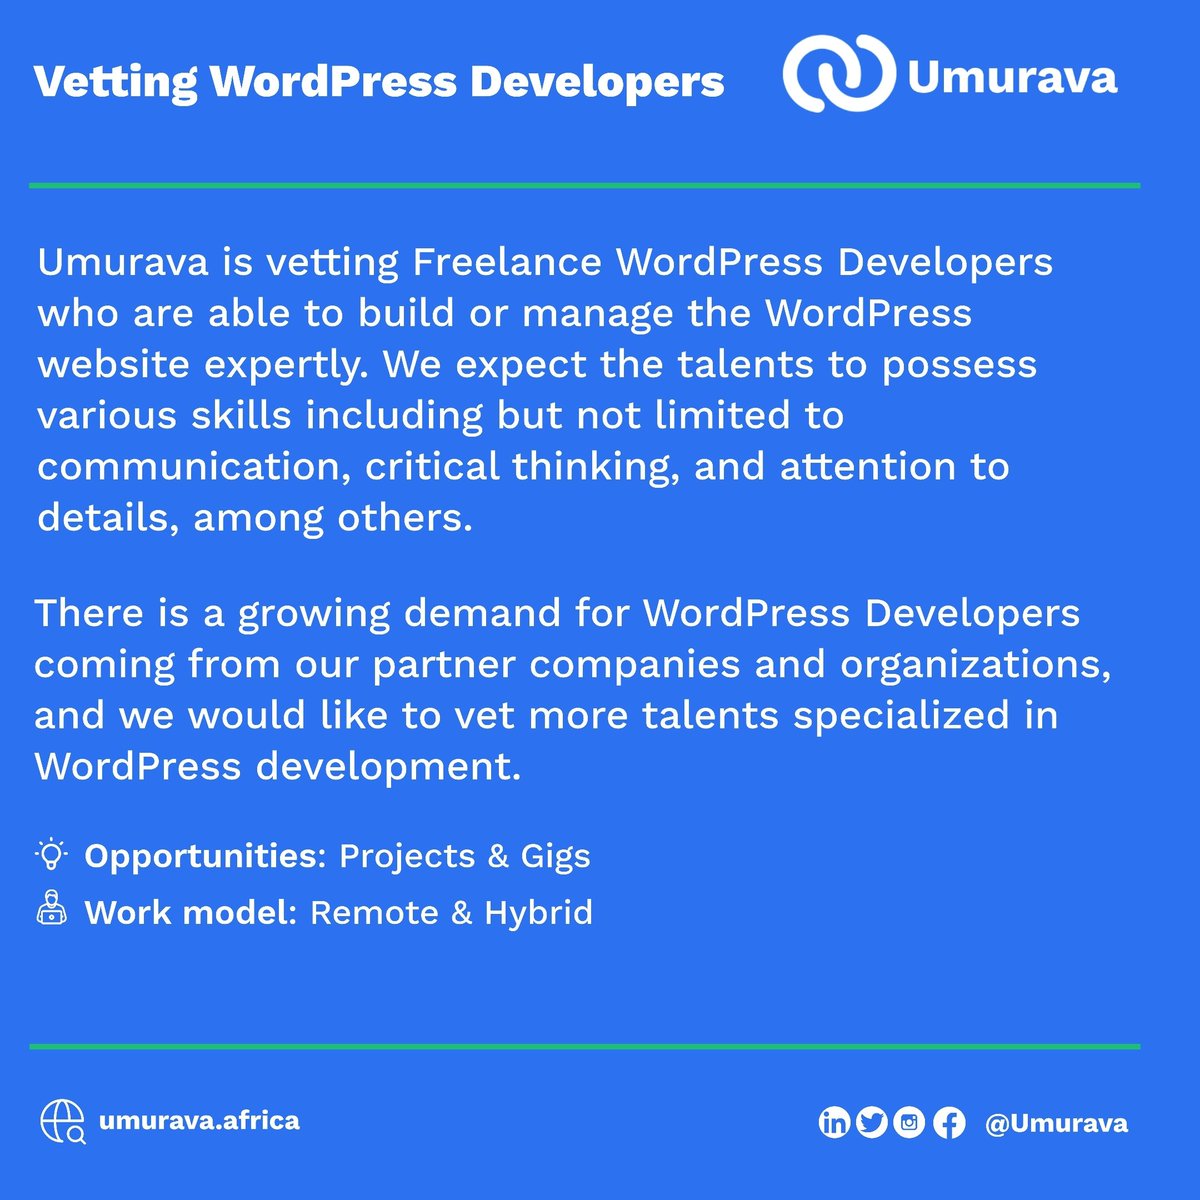 🚨We're vetting Freelance WordPress Developers🚨

We're looking for freelance #WordPressdevelopers able to build or manage WordPress websites. They'll be matched with projects & gigs from our partner companies. Are you Qualified? Apply here:forms.gle/p8eKnPsx8uC8kc…